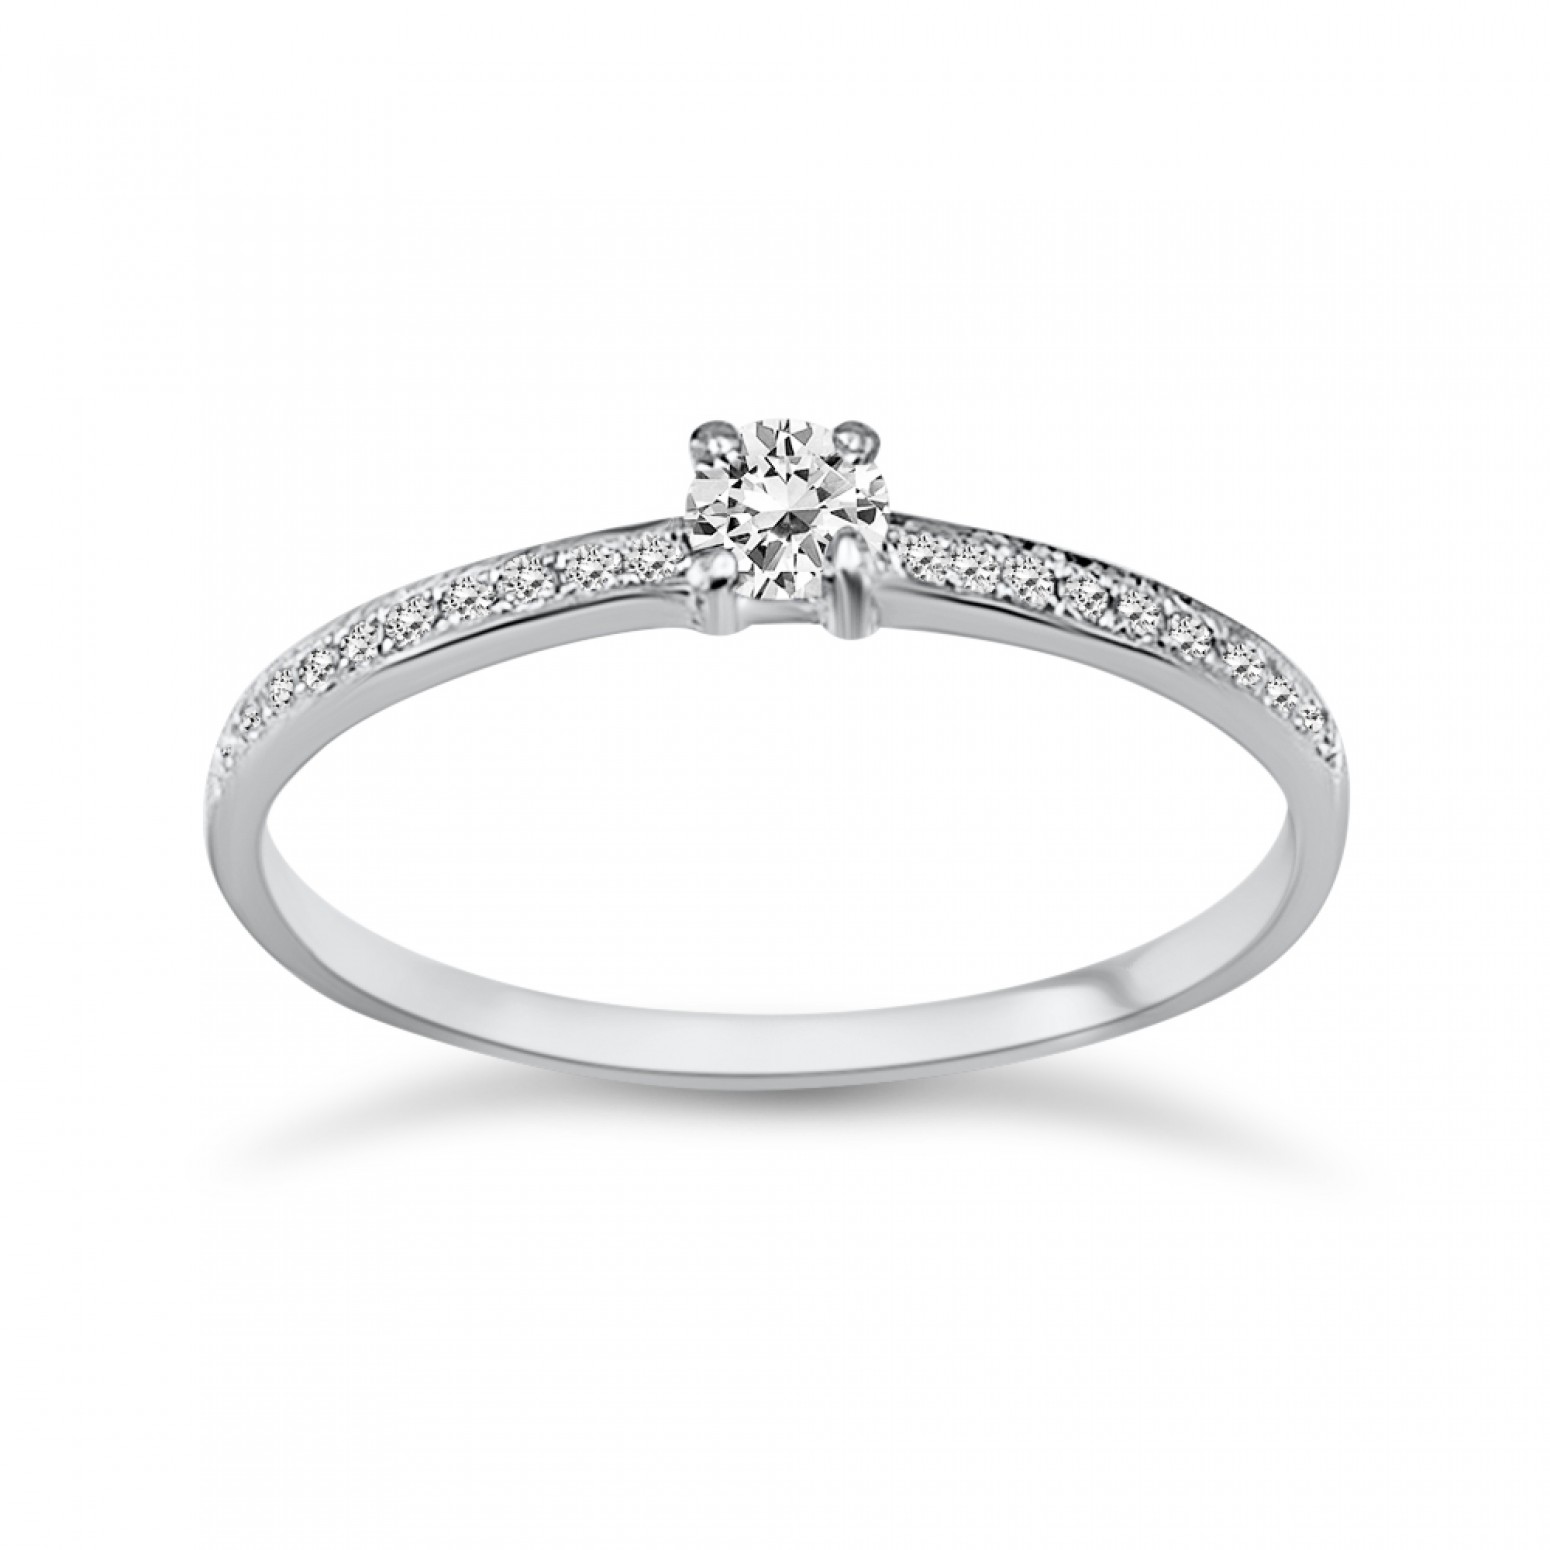 Solitaire ring 18K white gold with center diamond 0.11ct, SI1, F from IGL da3489 ENGAGEMENT RINGS Κοσμηματα - chrilia.gr